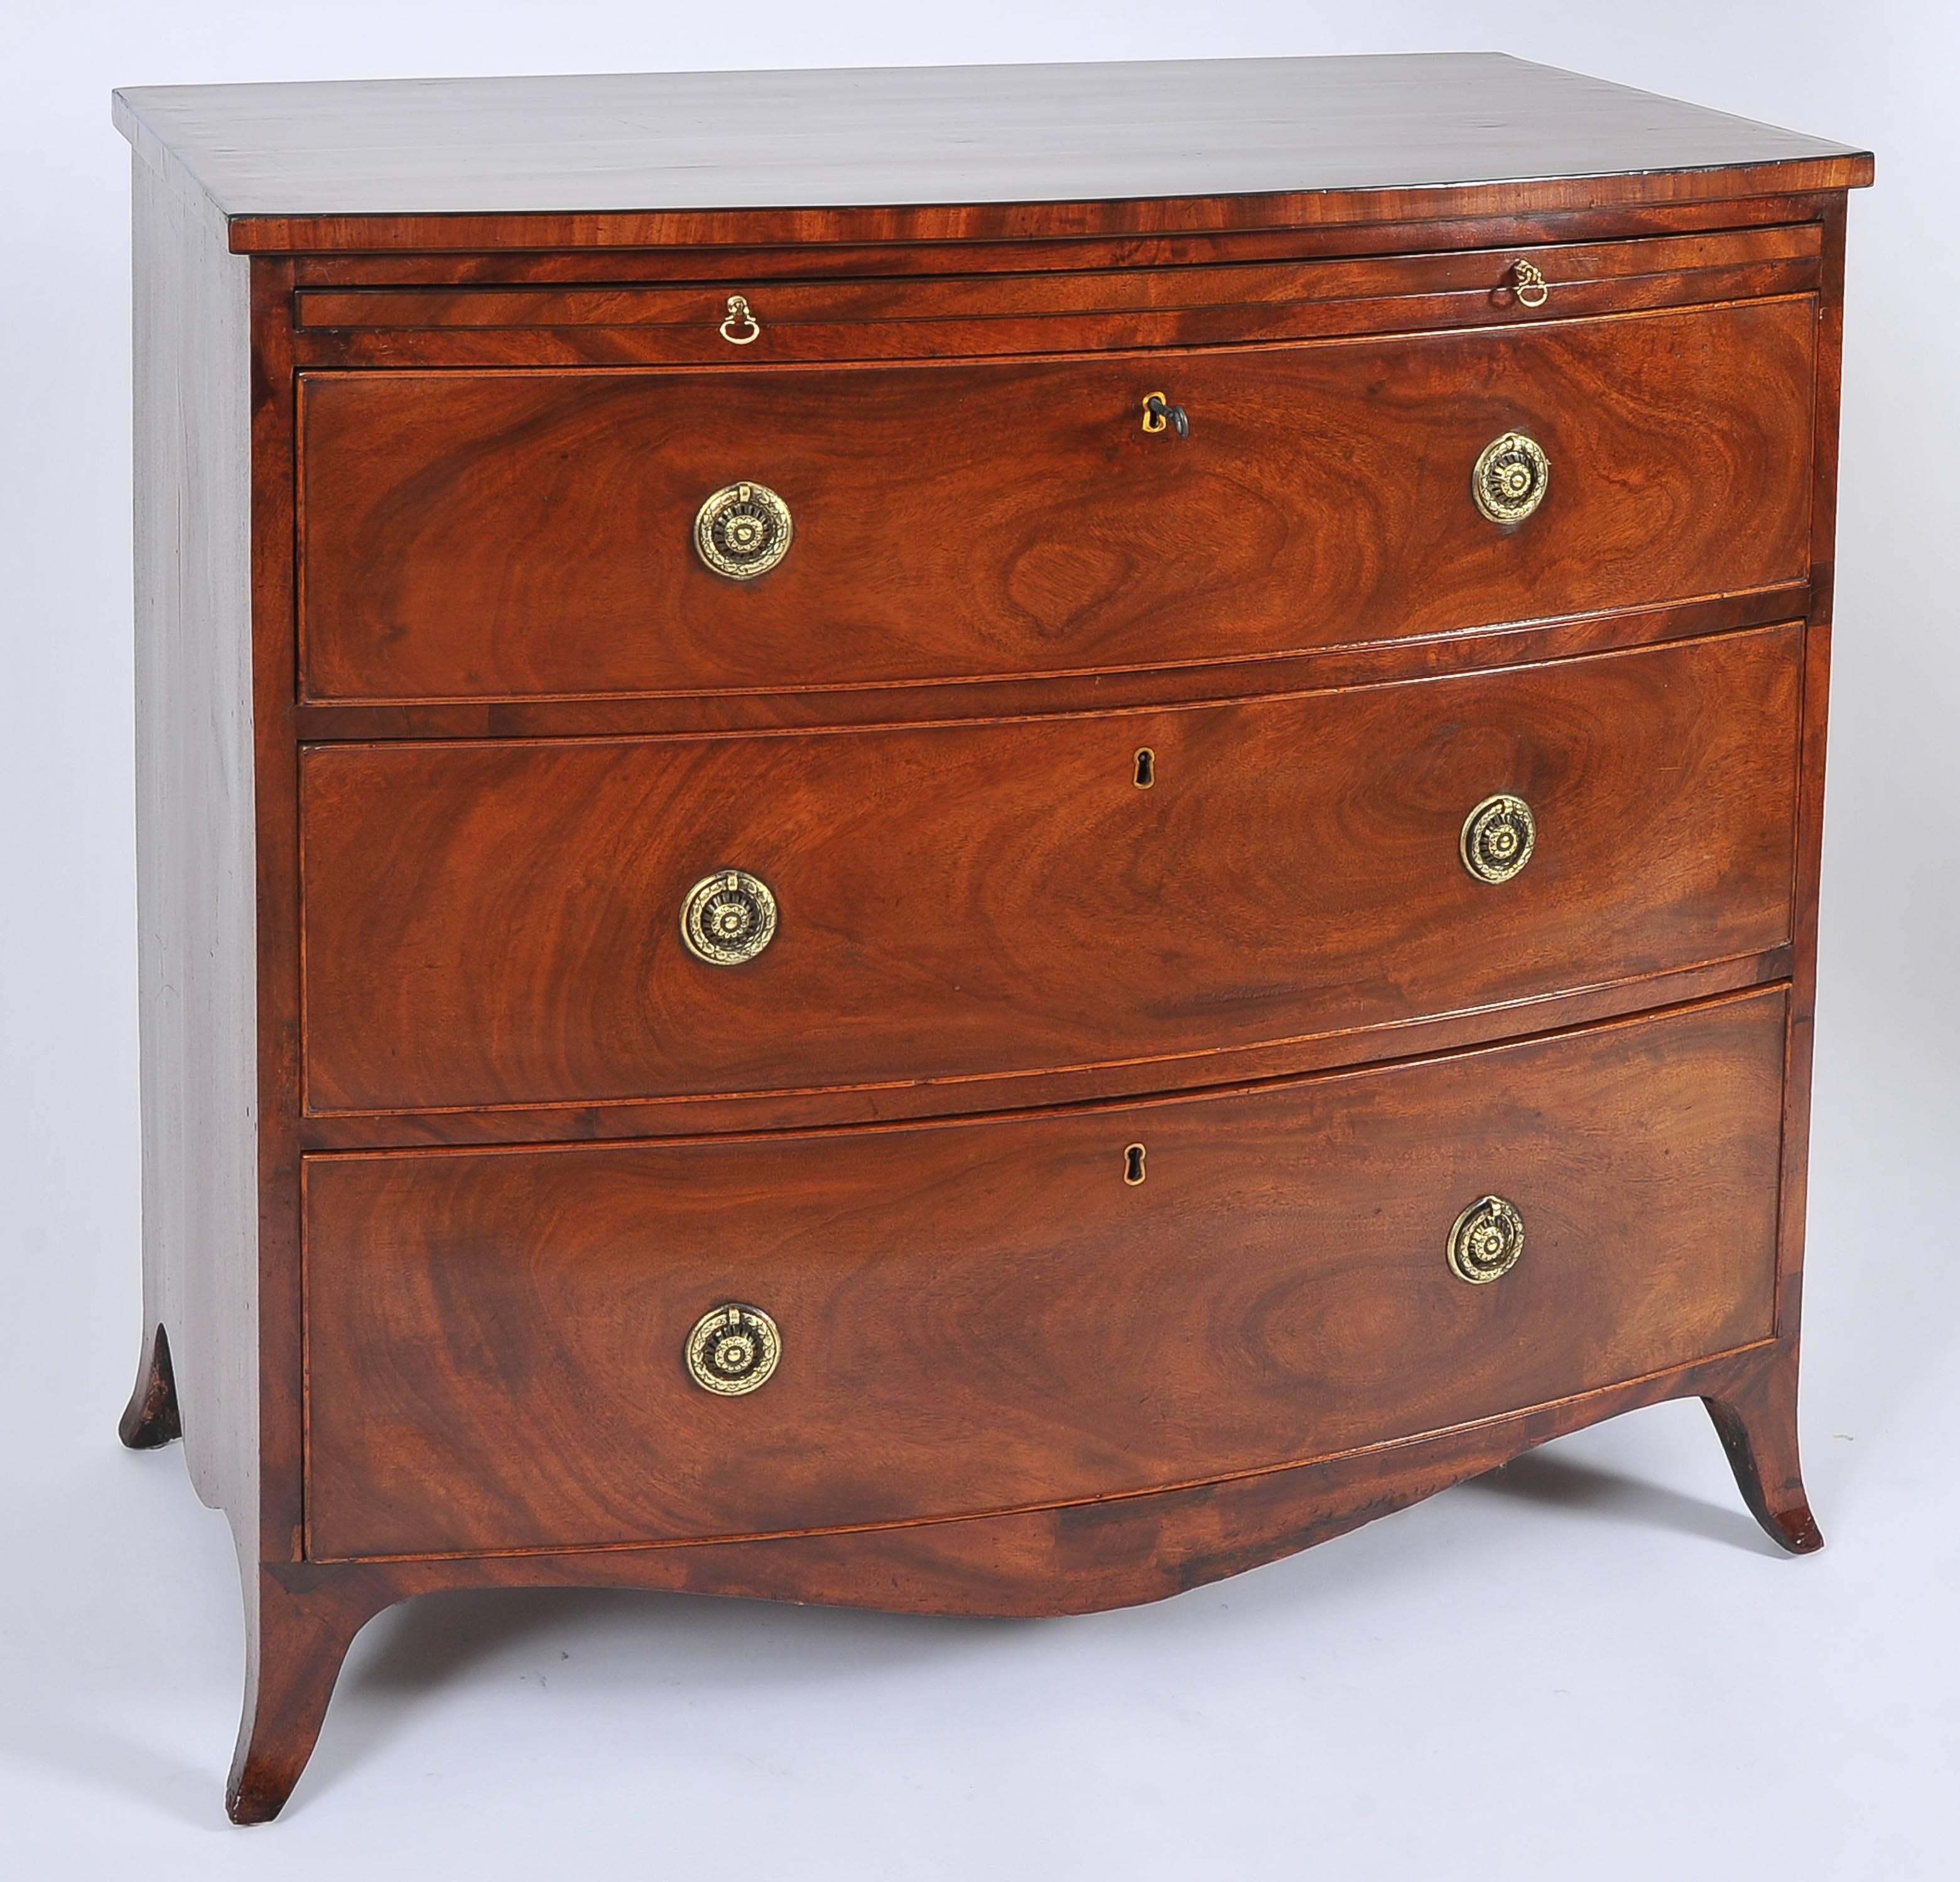 This striking and beautifully patinated Georgian bow fronted mahogany chest of drawers features three graduated drawers and baize lined brushing slide. The chest has brass pull rings and working locks for all the drawers with a key. There is ebony